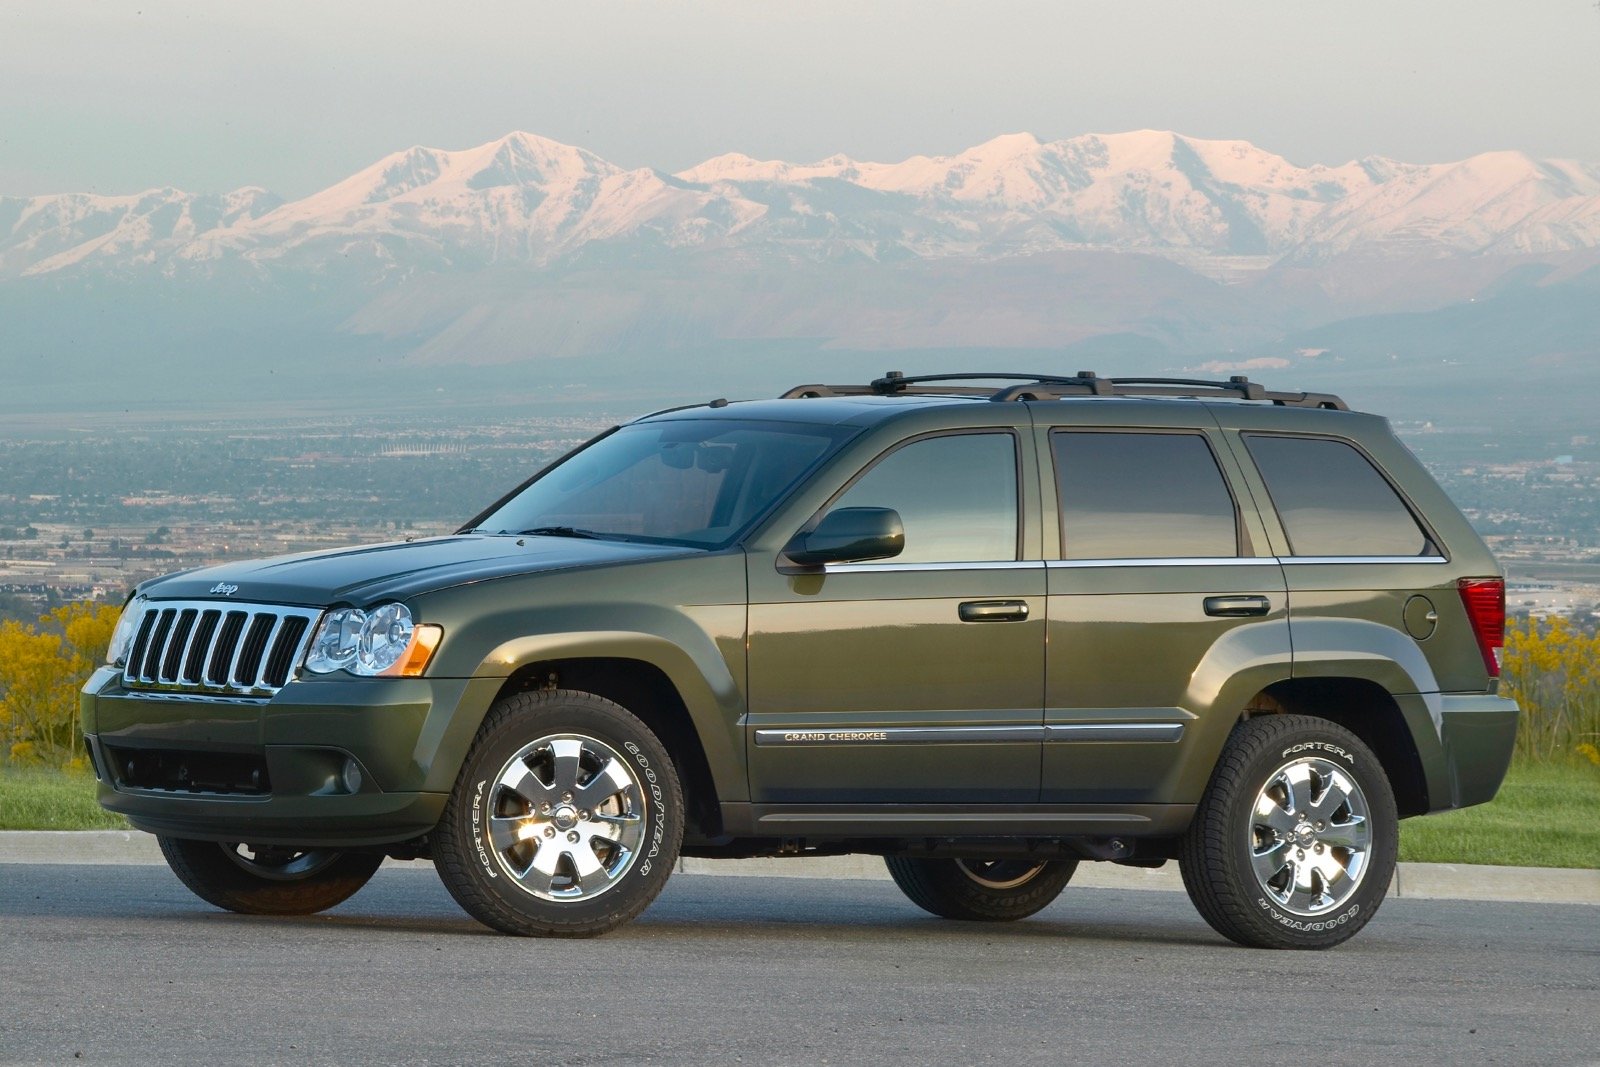 2008 Jeep Grand Cherokee: Prices, Reviews & Pictures - CarGurus